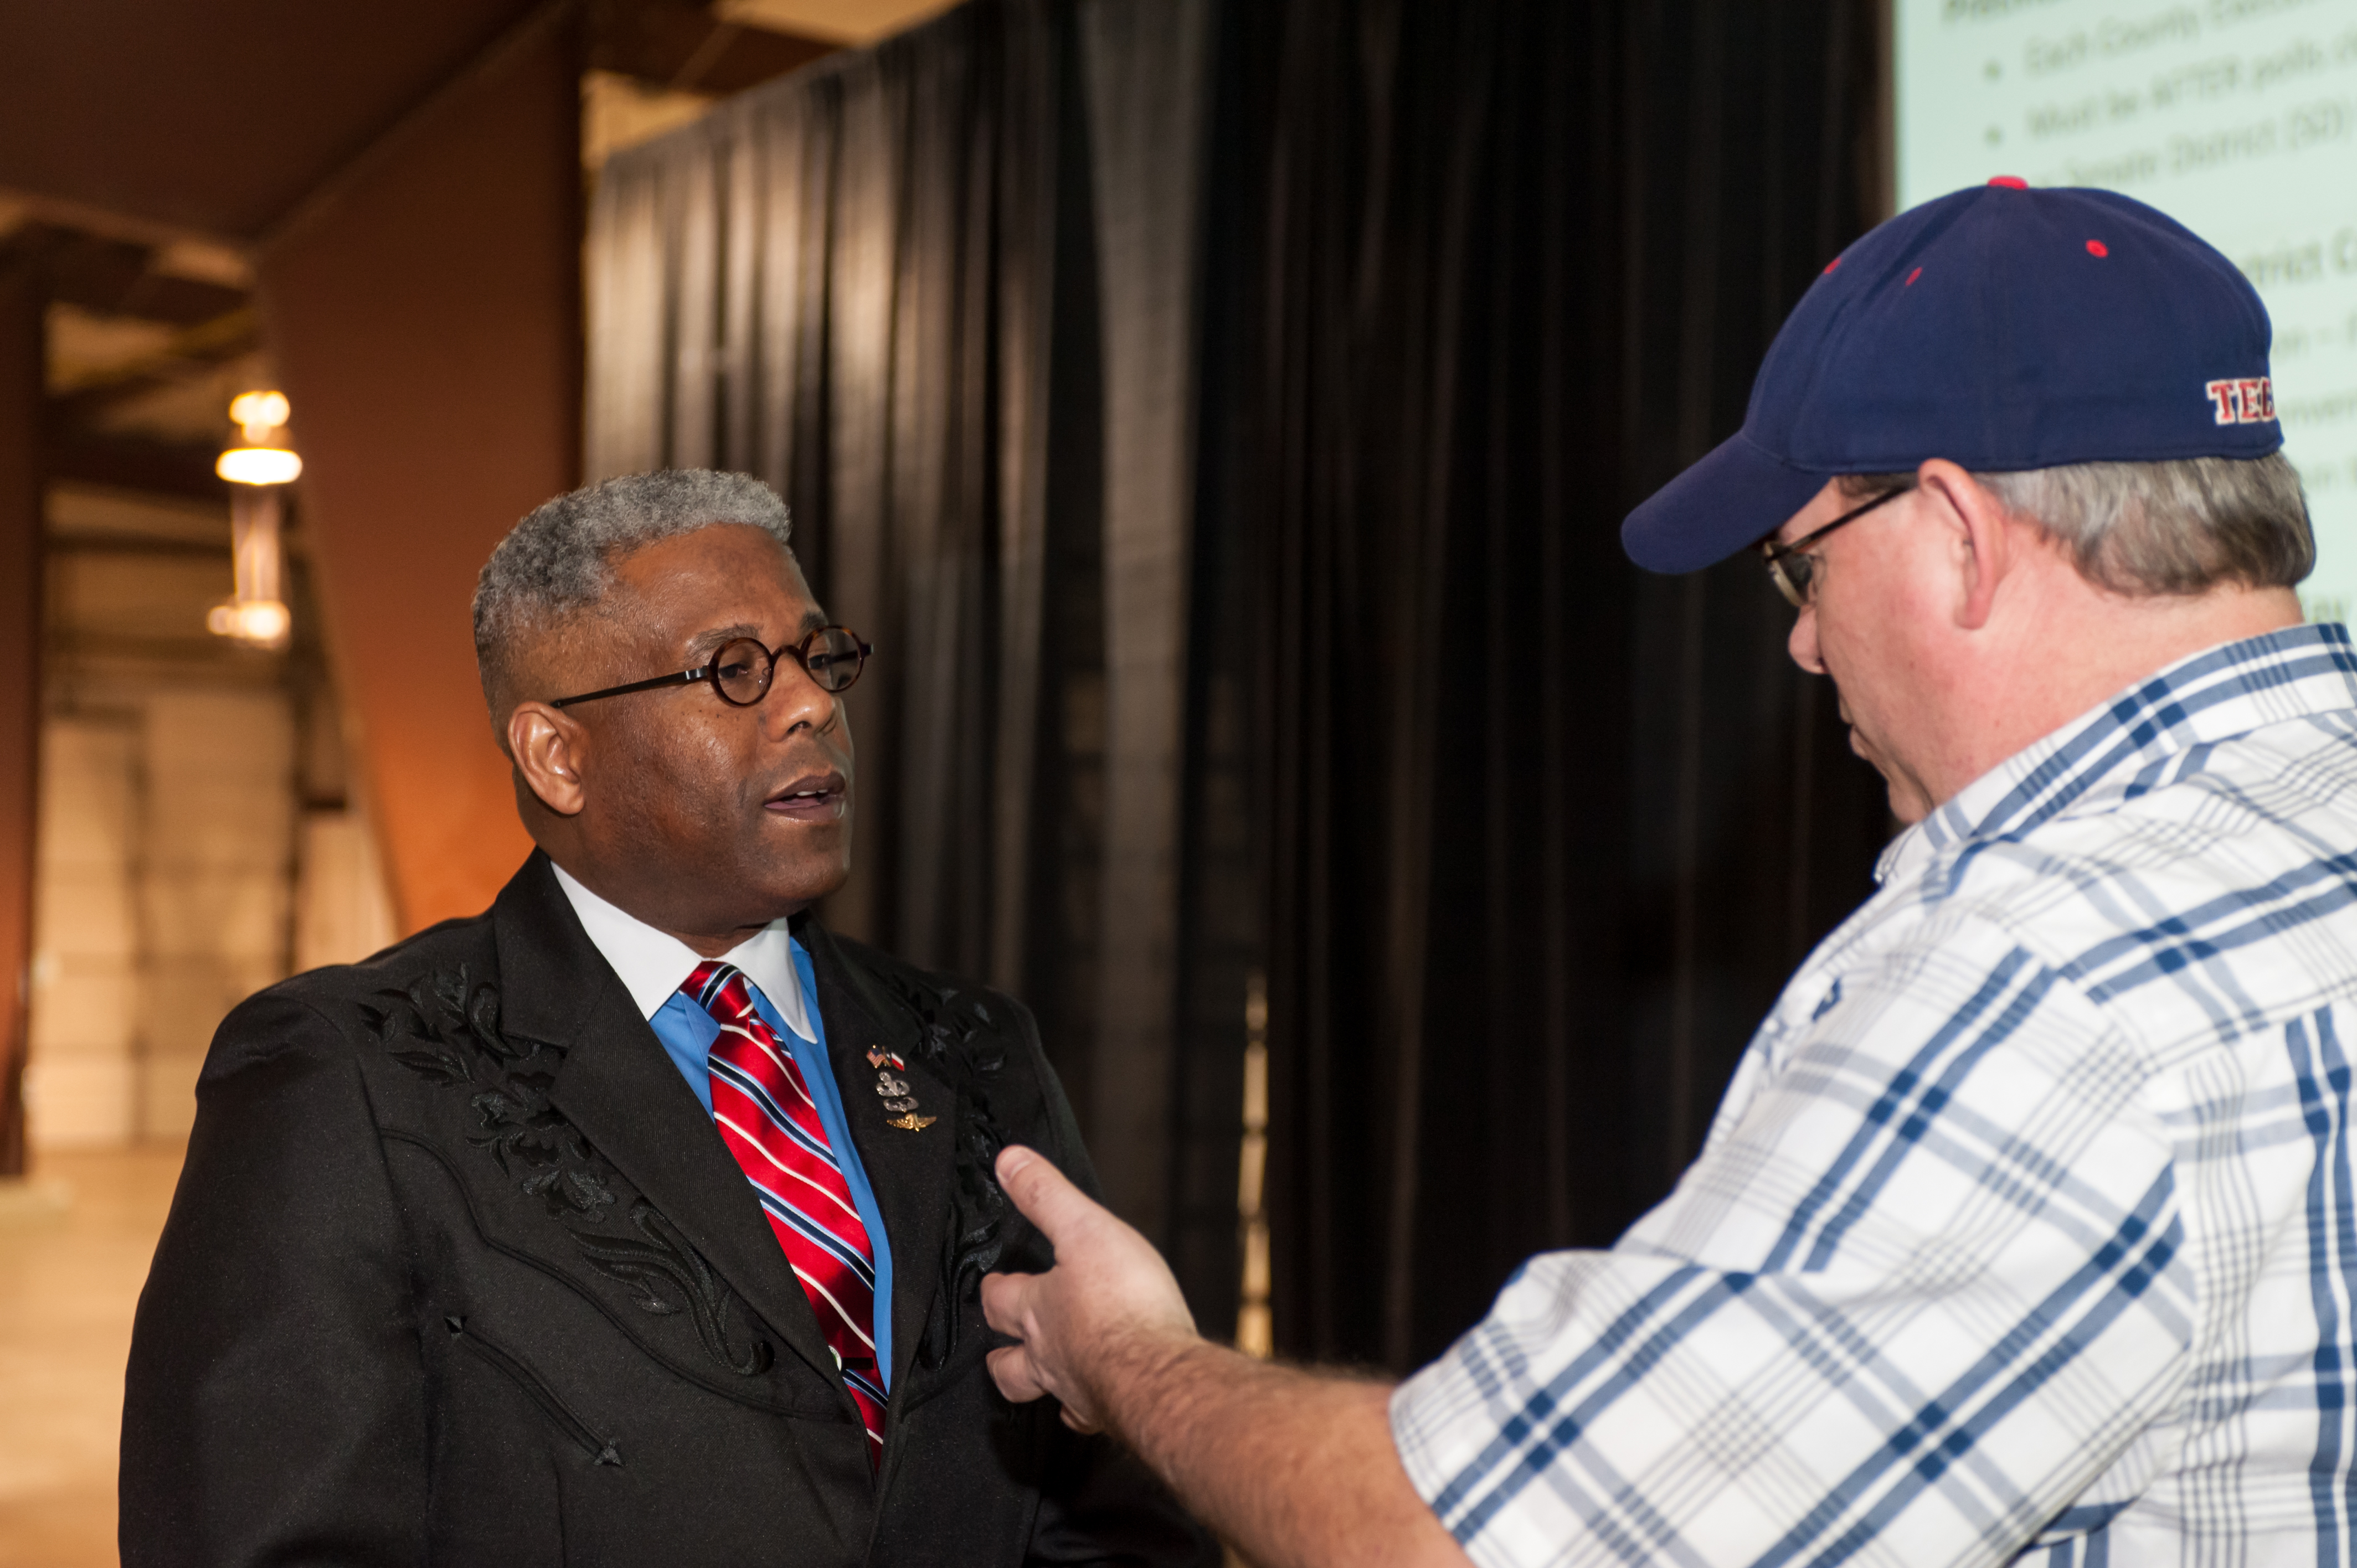 Shaie Williams for AGN Media. Lt. Colonel Allen B West visits with Danny Butcher at the Texas Panhandle Lincoln-Reagan Day Dinner hosted by the local Republican party groups held at The Rex Baxter Building in Amarillo, TX on January 29, 2016